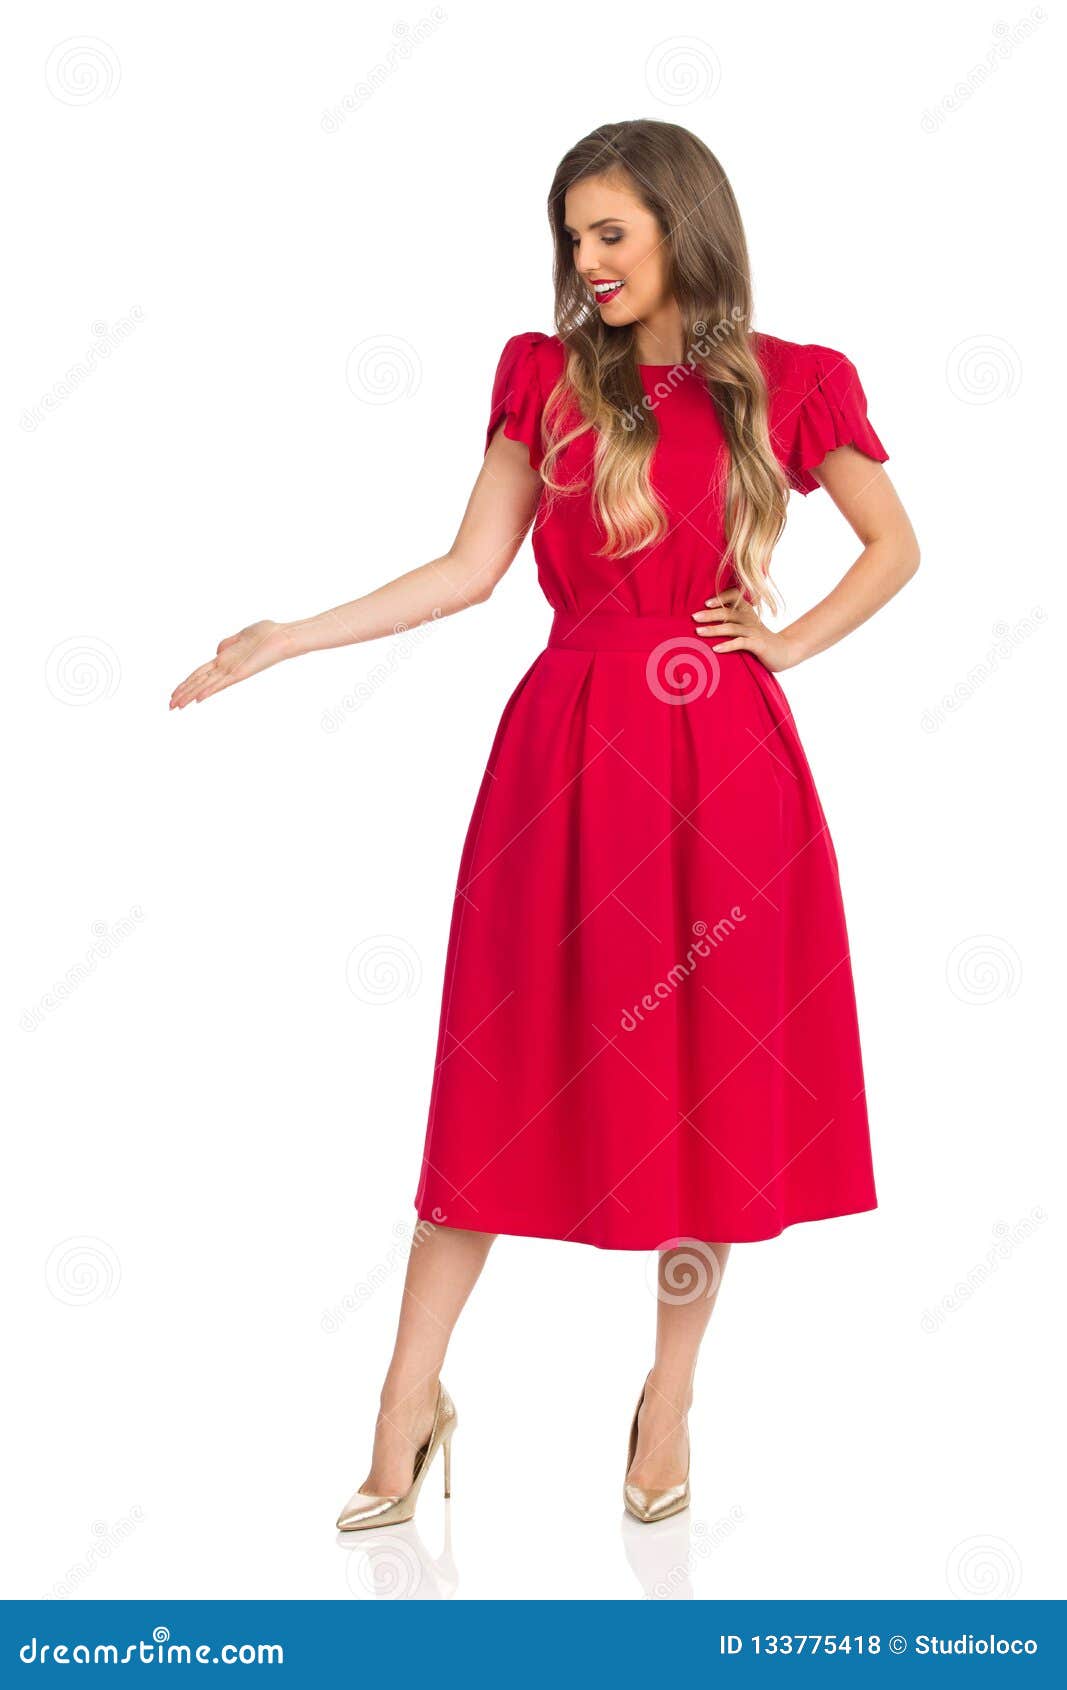 Smiling Fashion Woman in Red Dress and Gold High Heels is Looking Away ...